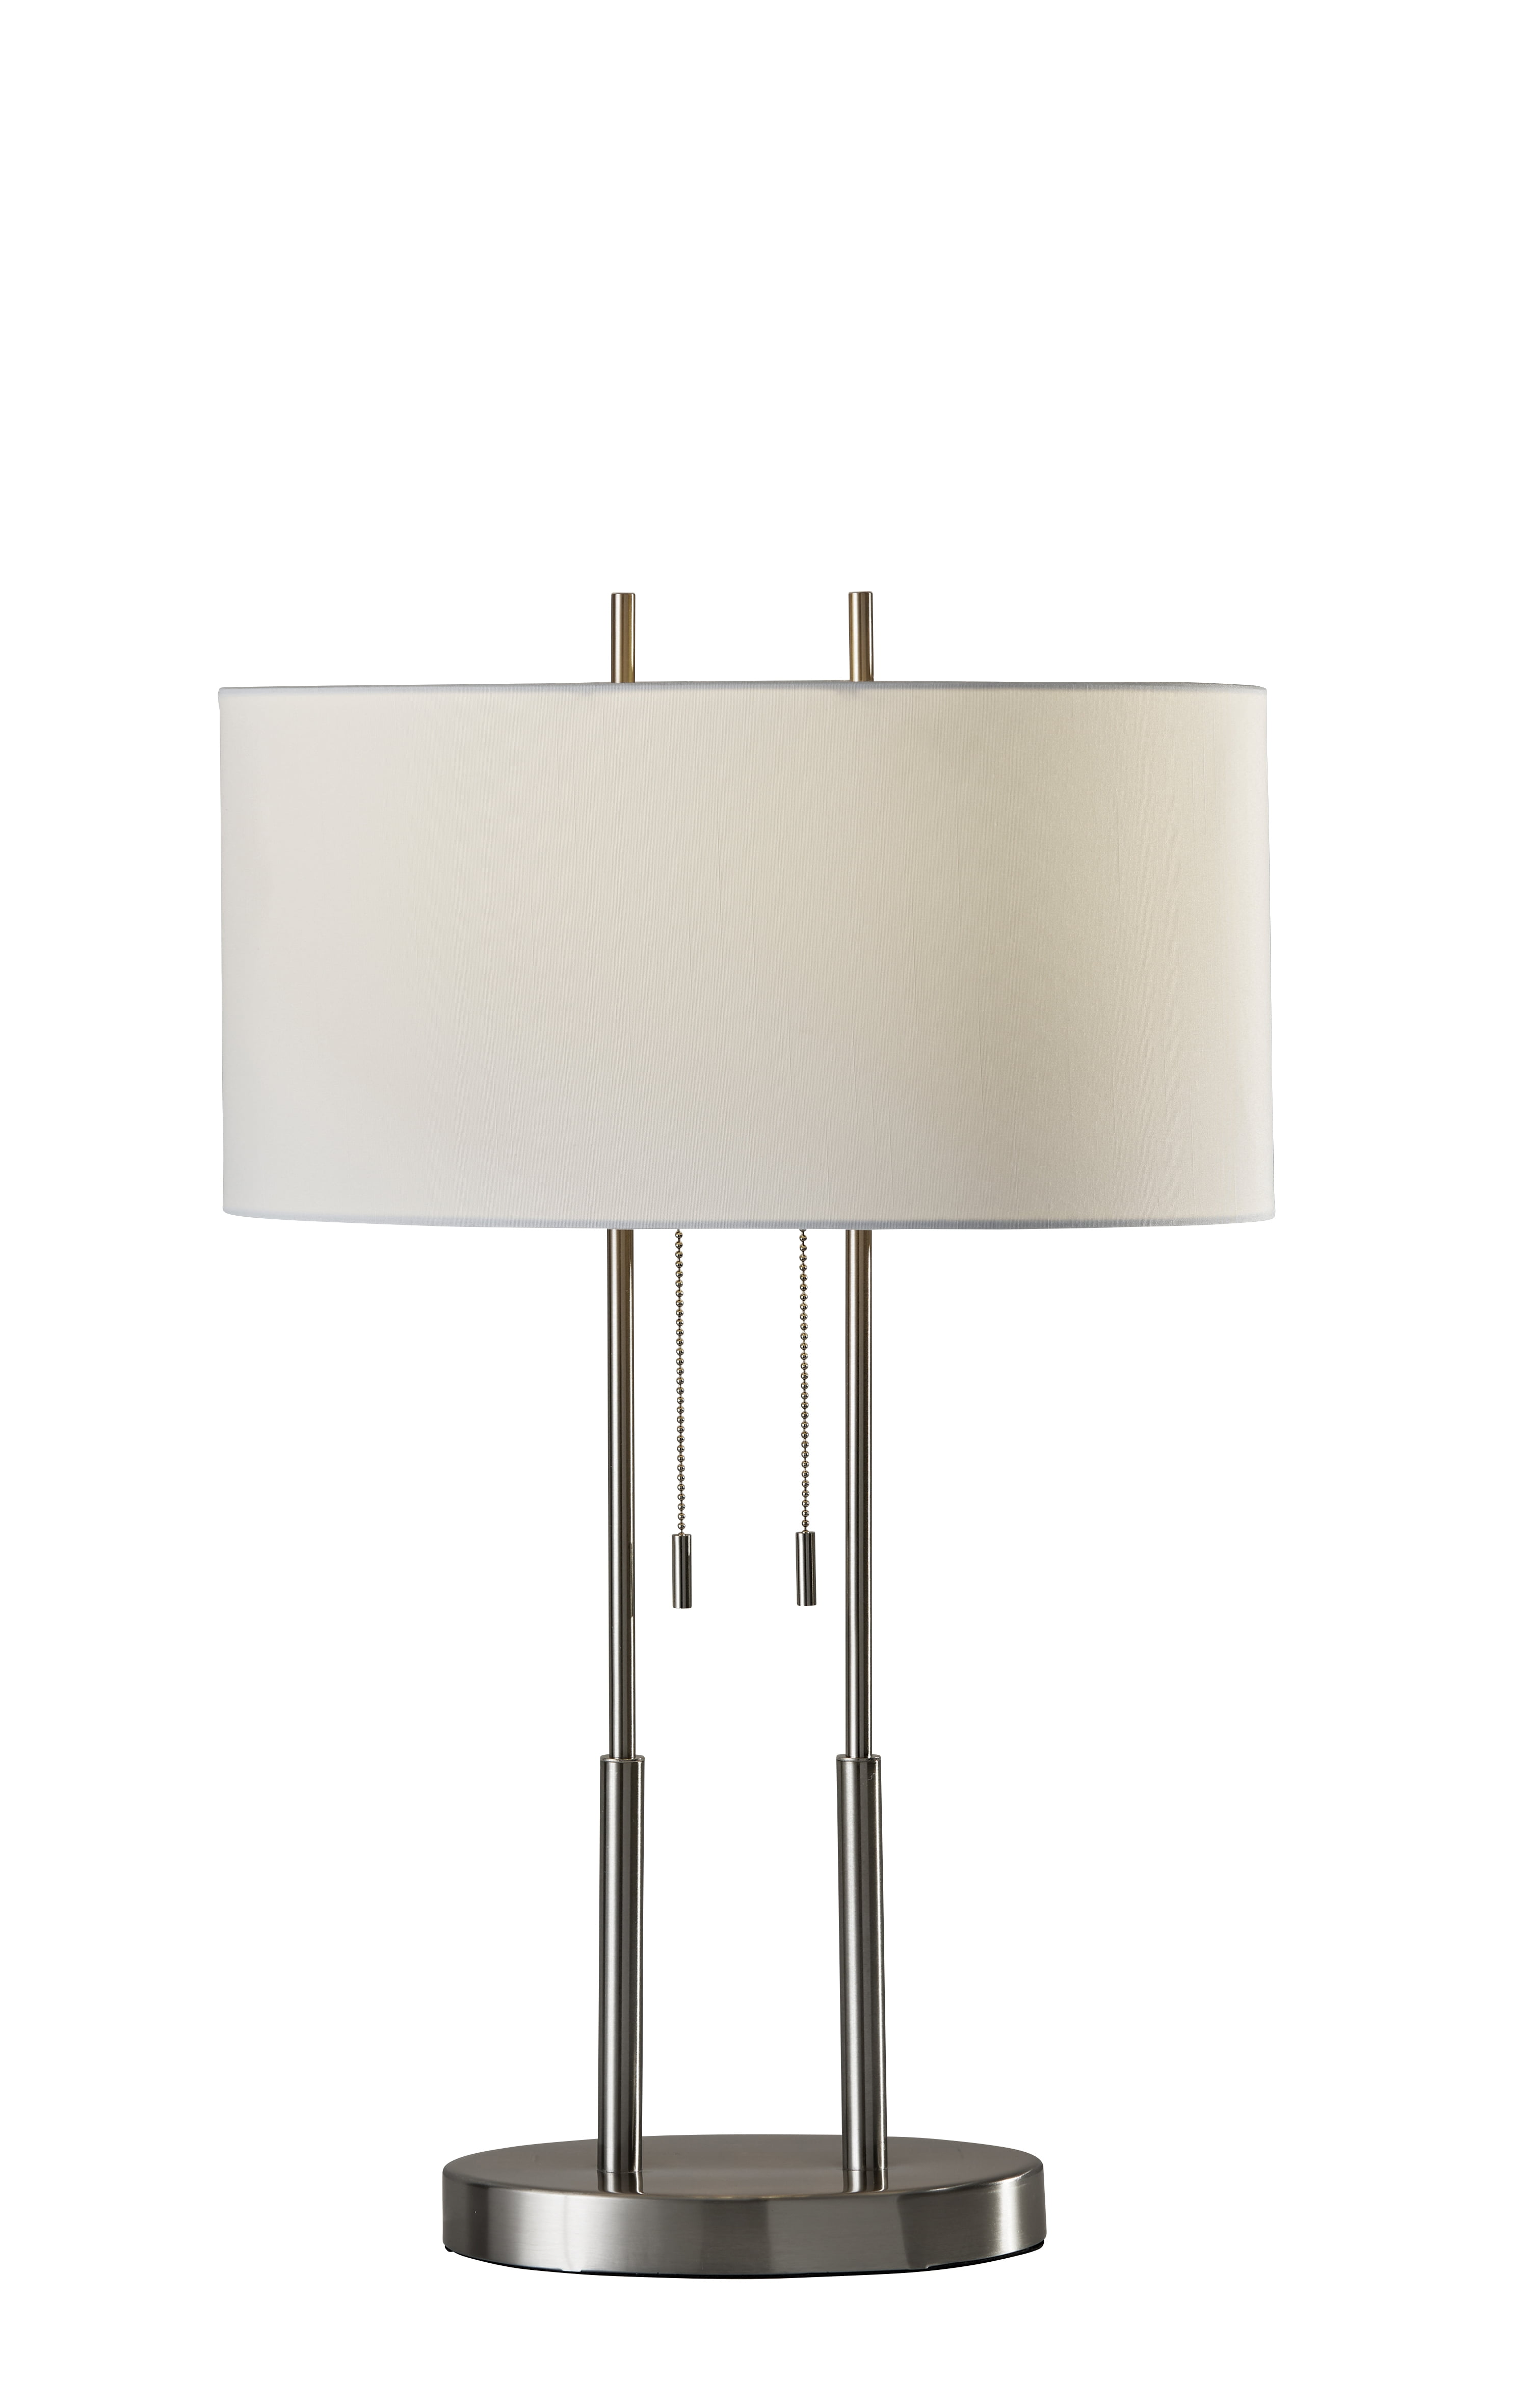 Adesso Duet Table Lamp Brushed Steel, Adesso Brushed Steel Table Lamp